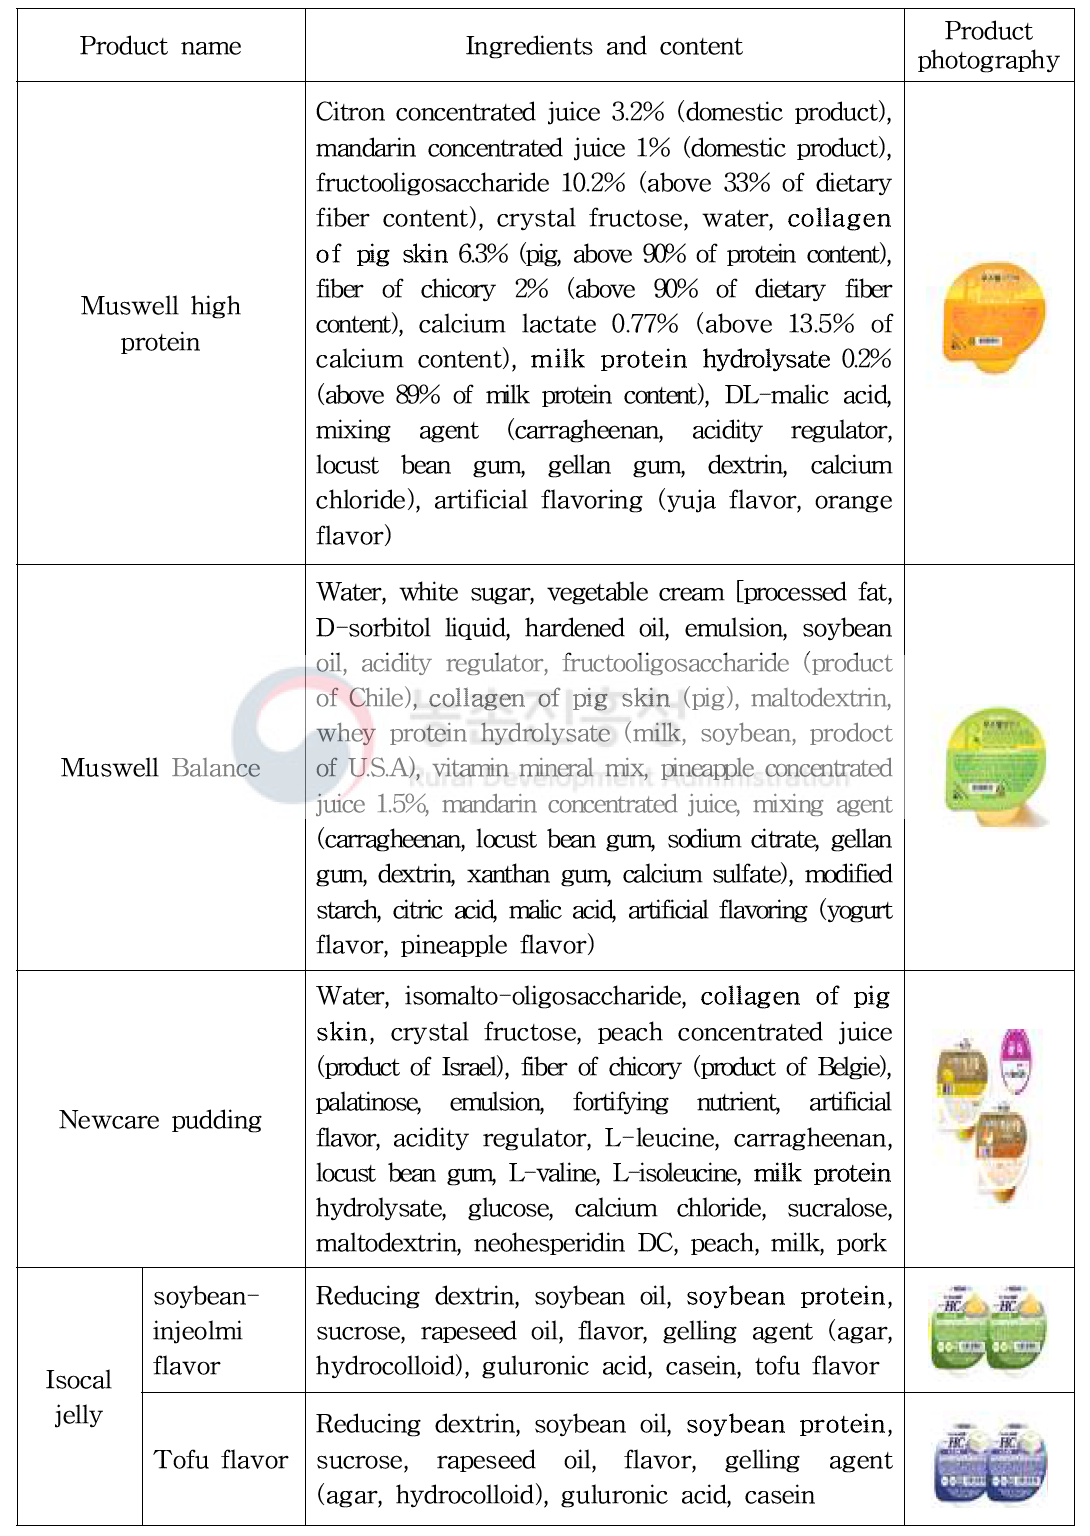 Silver-jelly products marketed in Korea